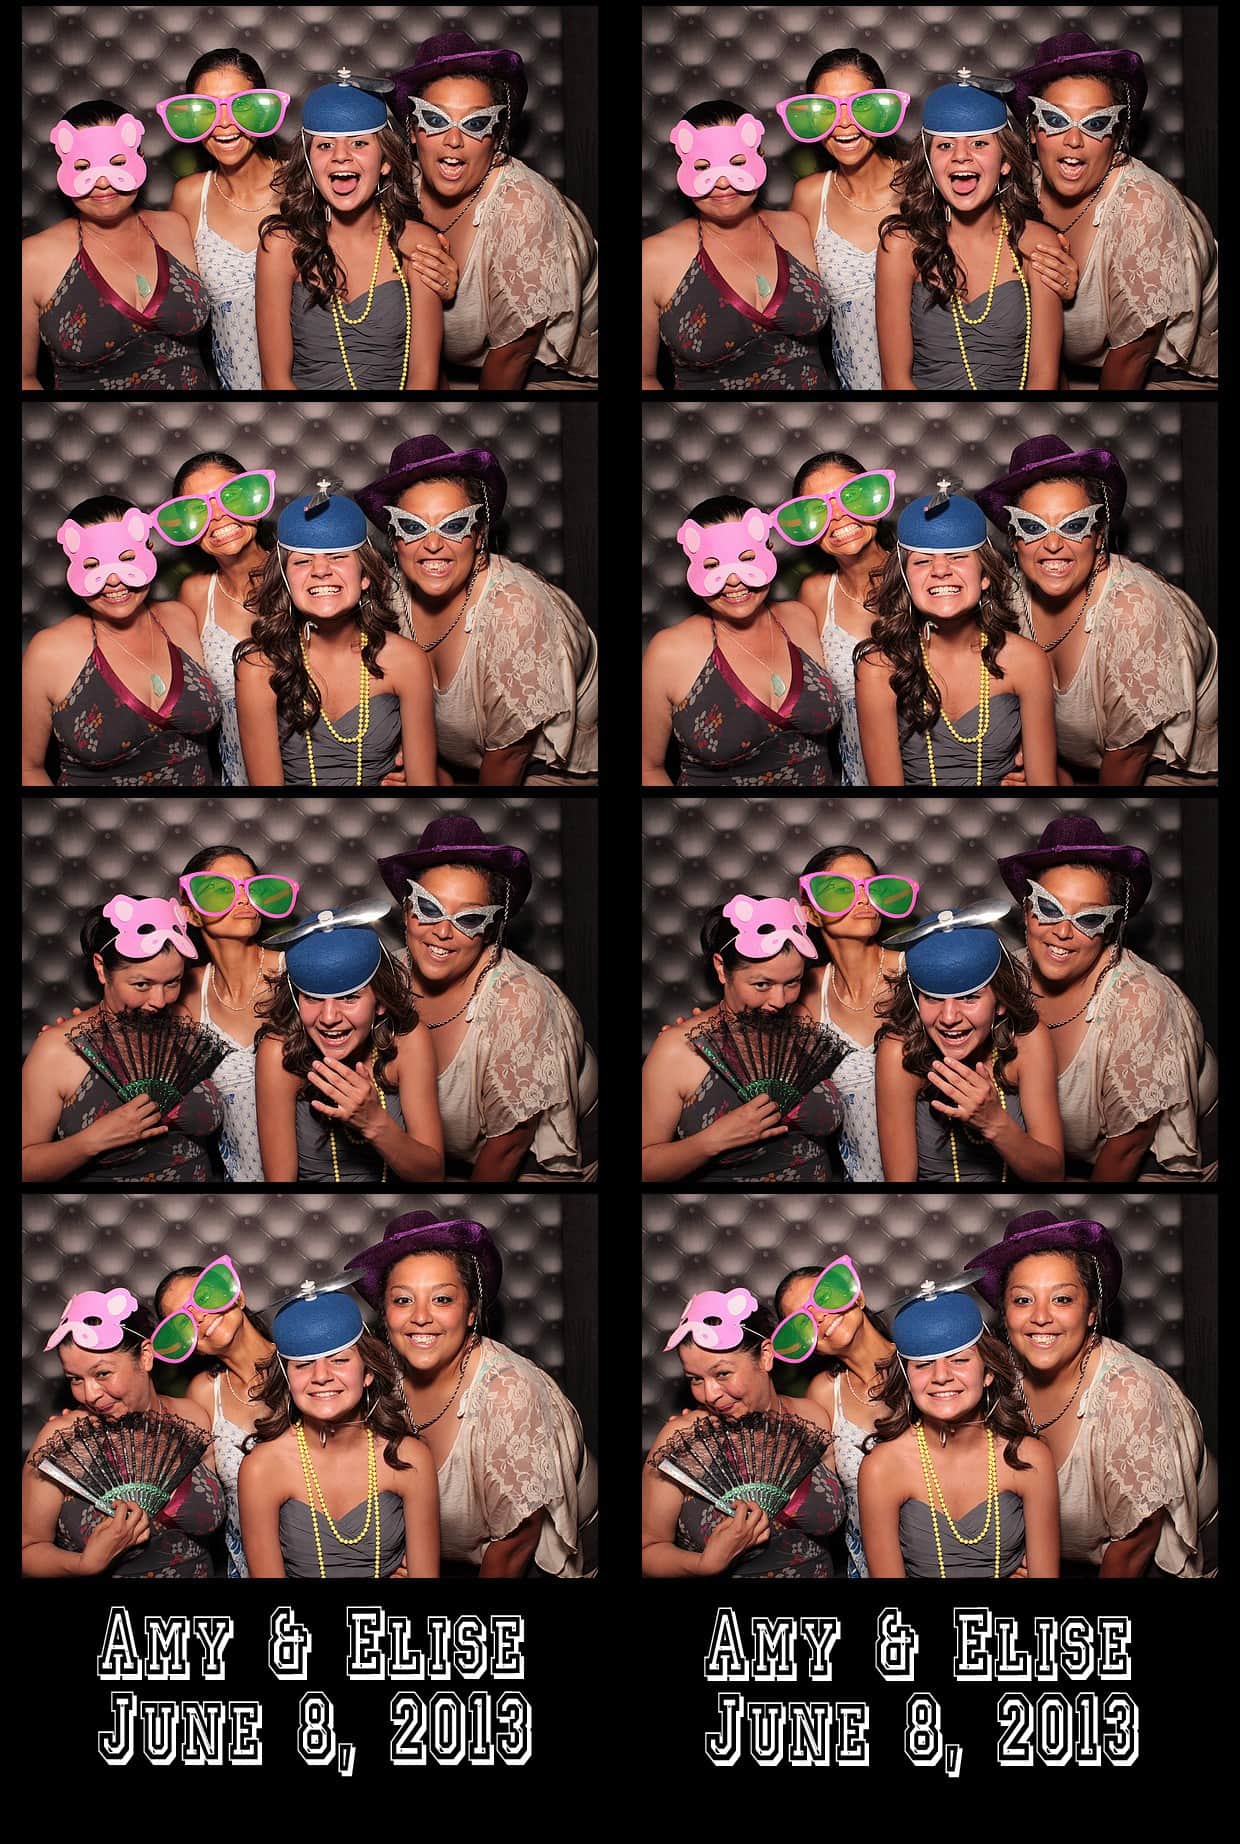 Austin-Wedding-Photo Booth Rental-El Paso-No. 1-Best-Memories-LGBT-Backgrounds-Selections-House on the Hill-Venue